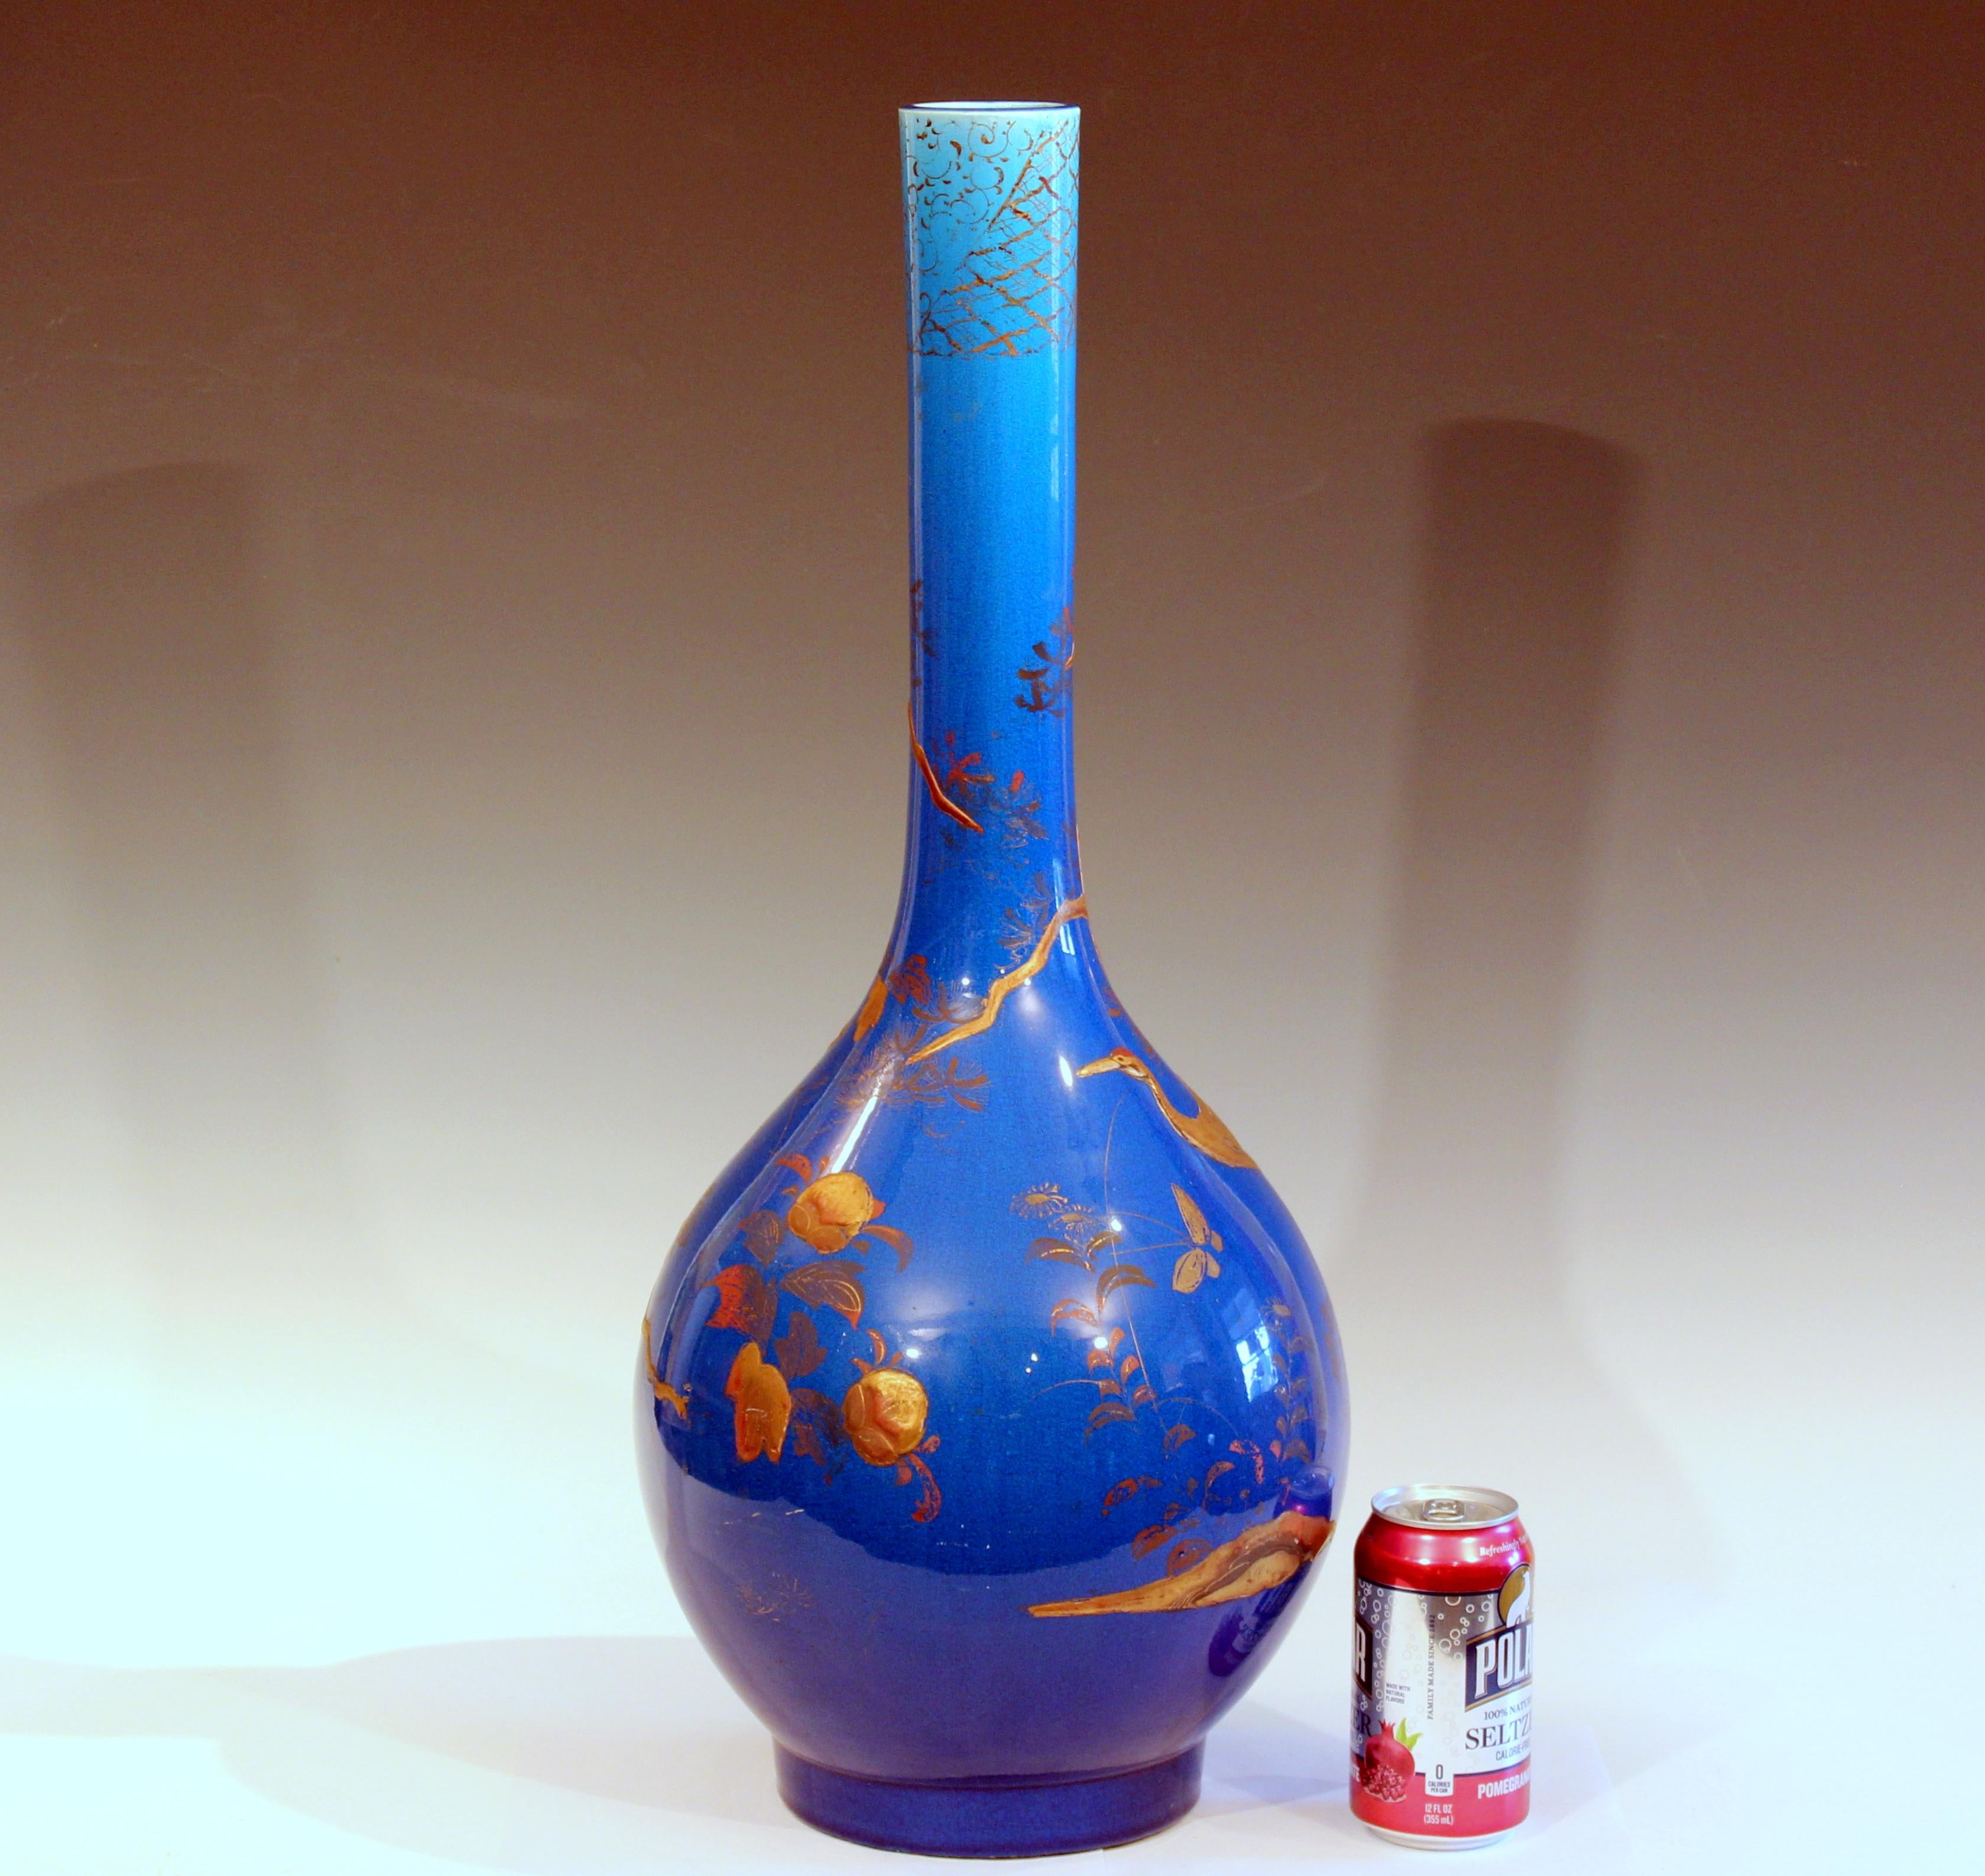 Large Kyoto-Awaji vase in bright blue crackle glaze with cold painted lacquer decoration, circa 1910s. Measures: 25